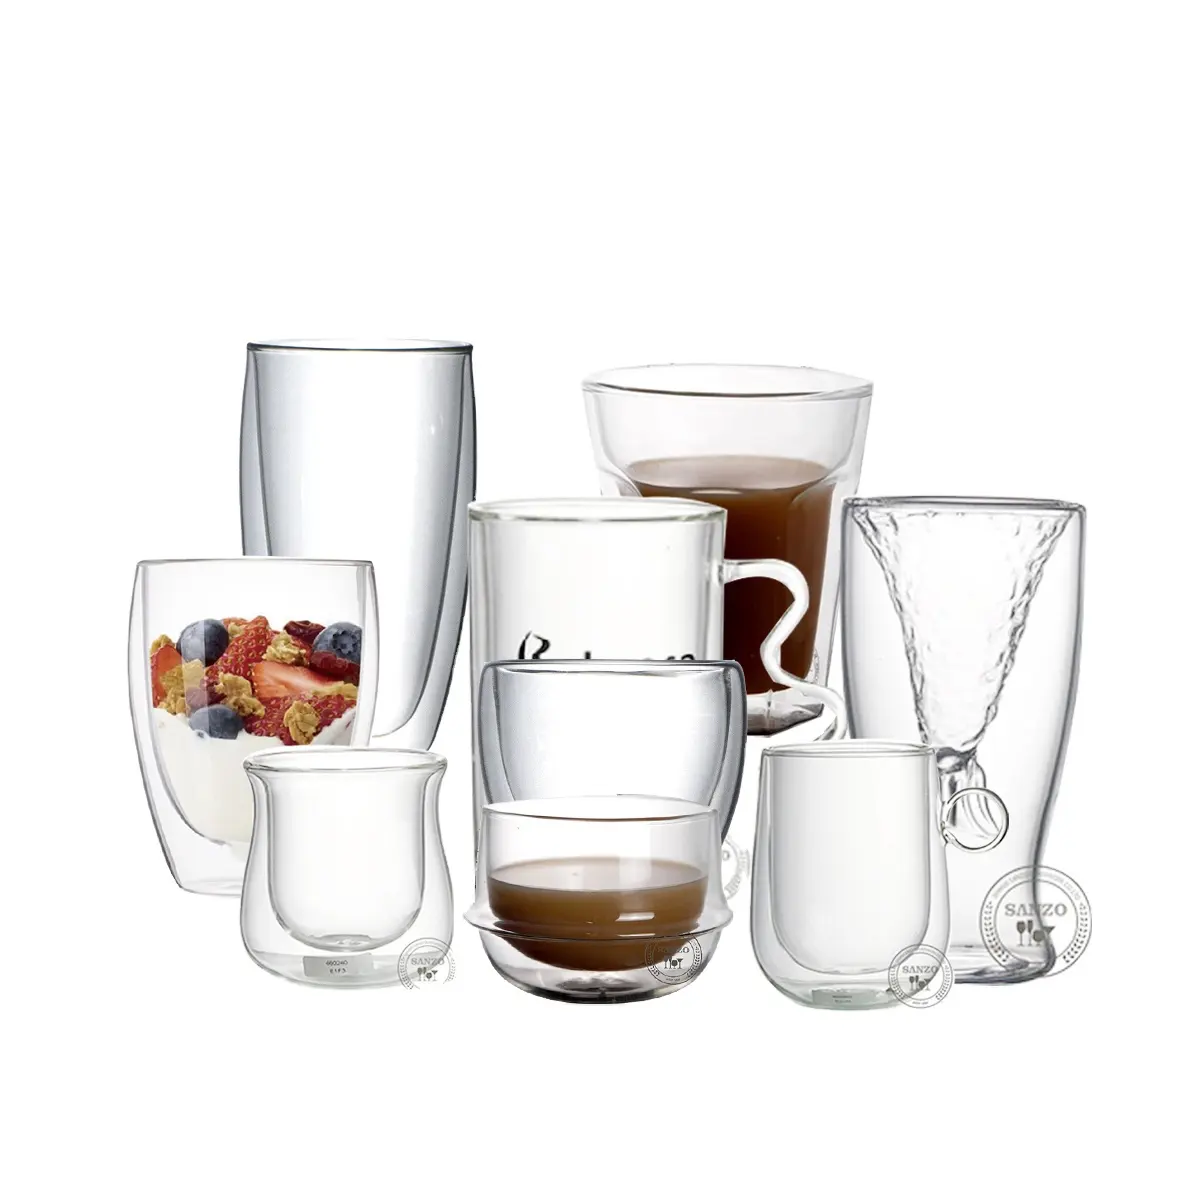 Household modern simple style high temperature resistant high borosilicate glass double wall cup